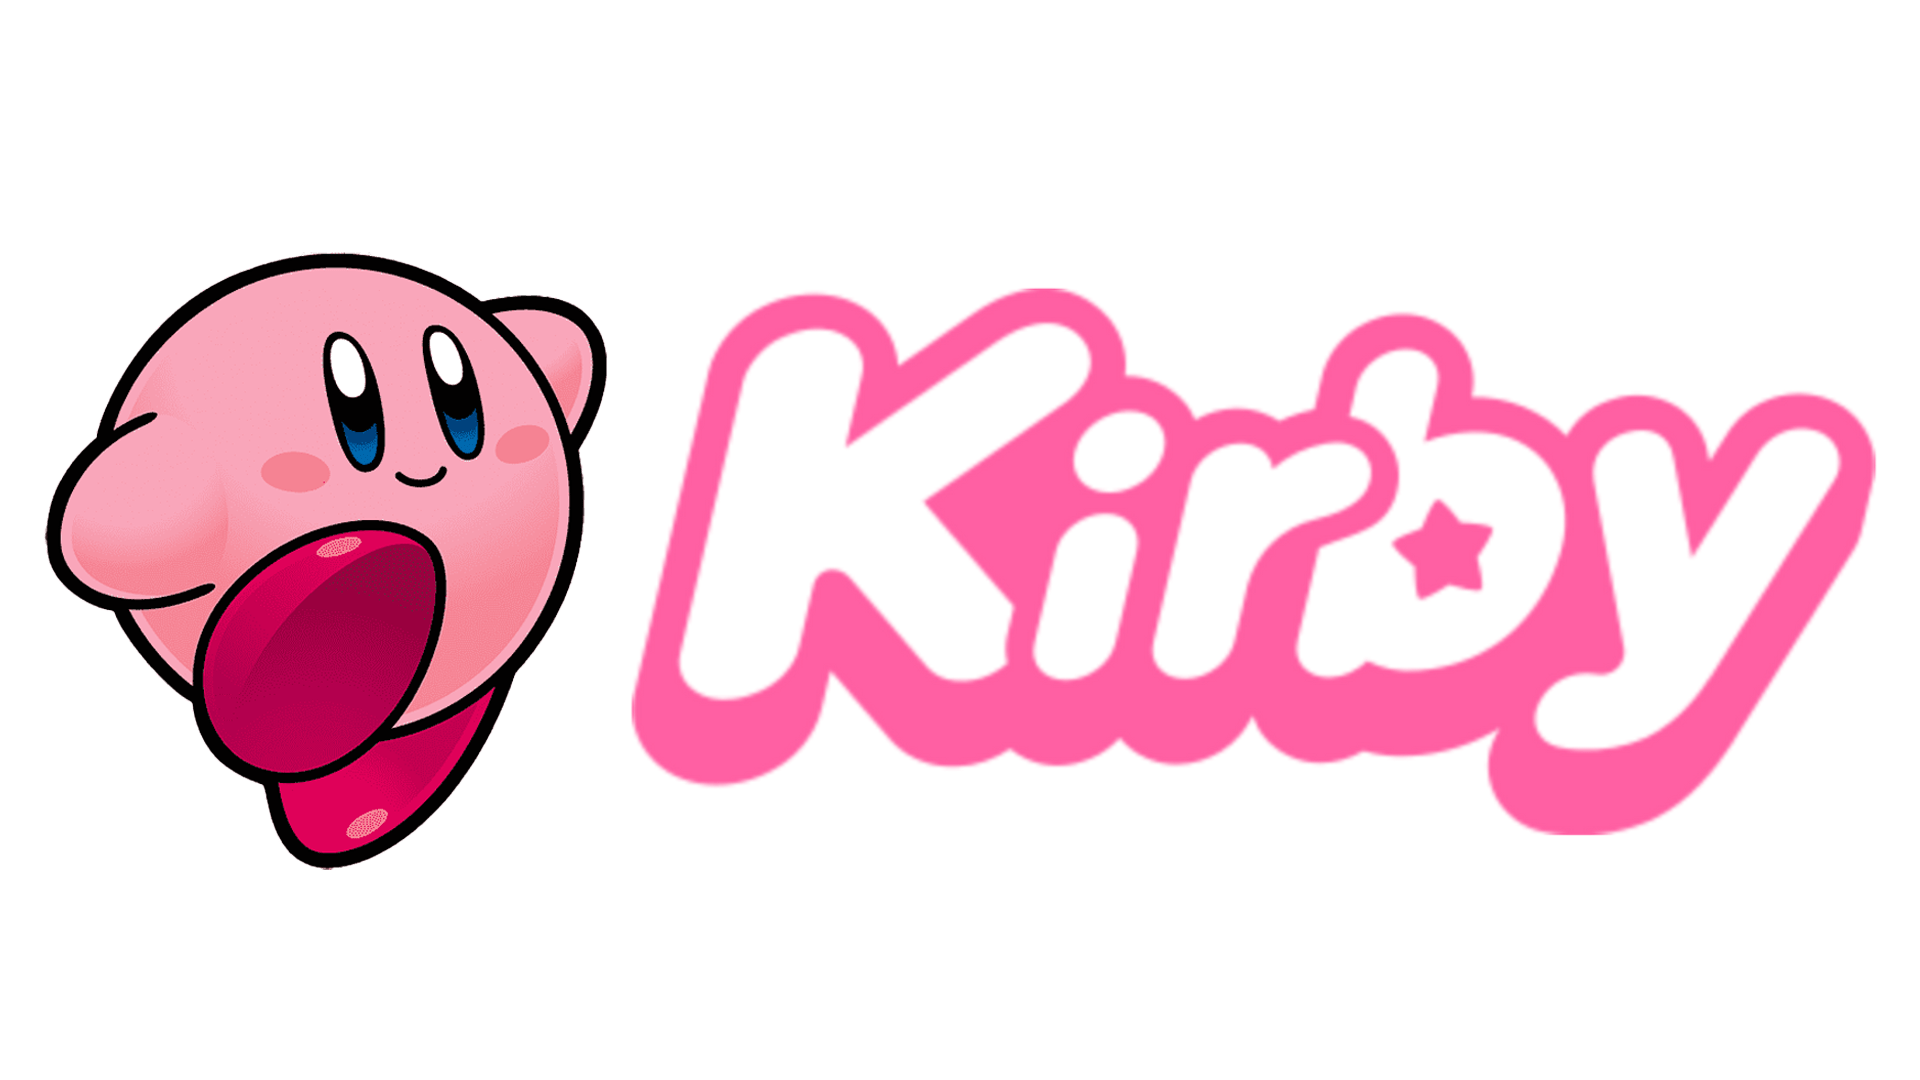 Marque: KIRBY